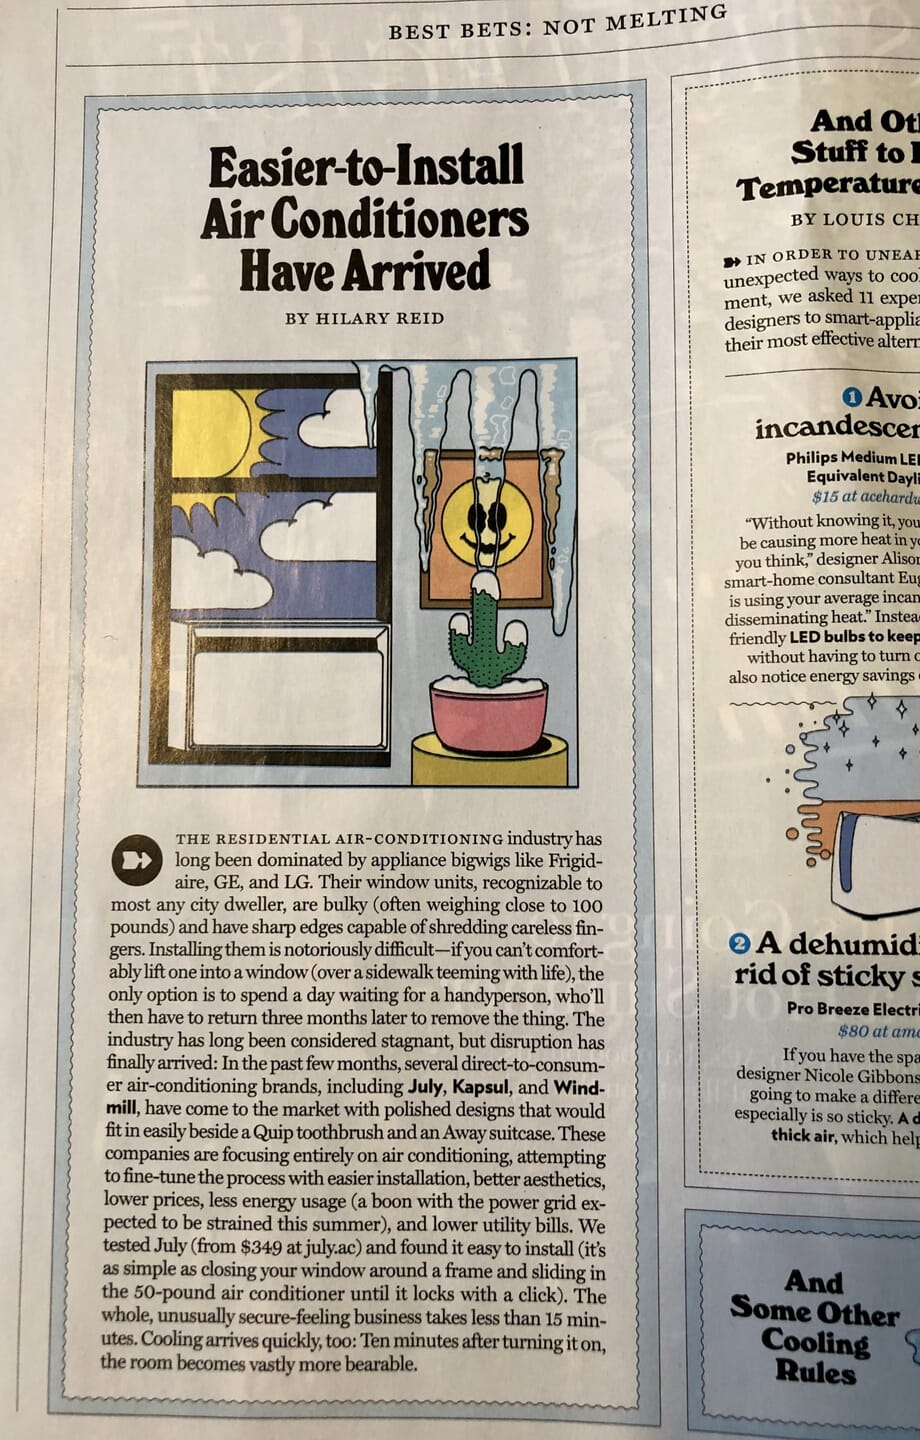 One page of the July edition of New York magazine